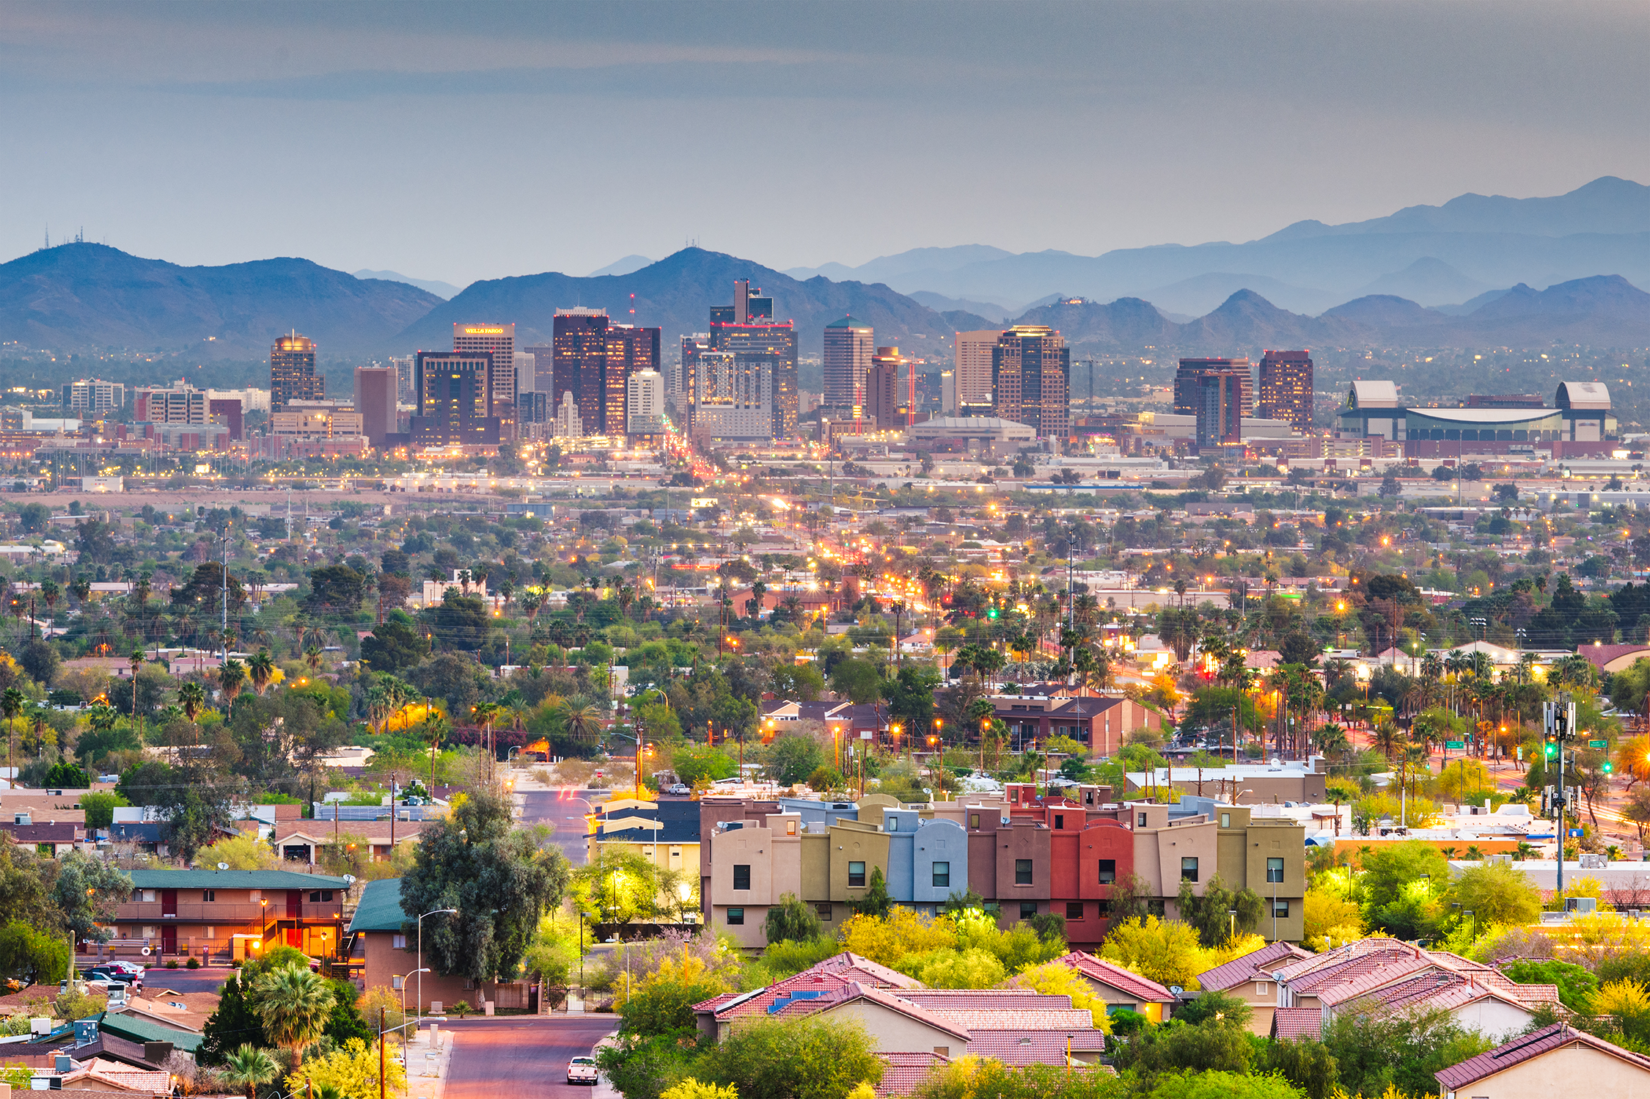 The city of Phoenix from an aerial viewpoint.